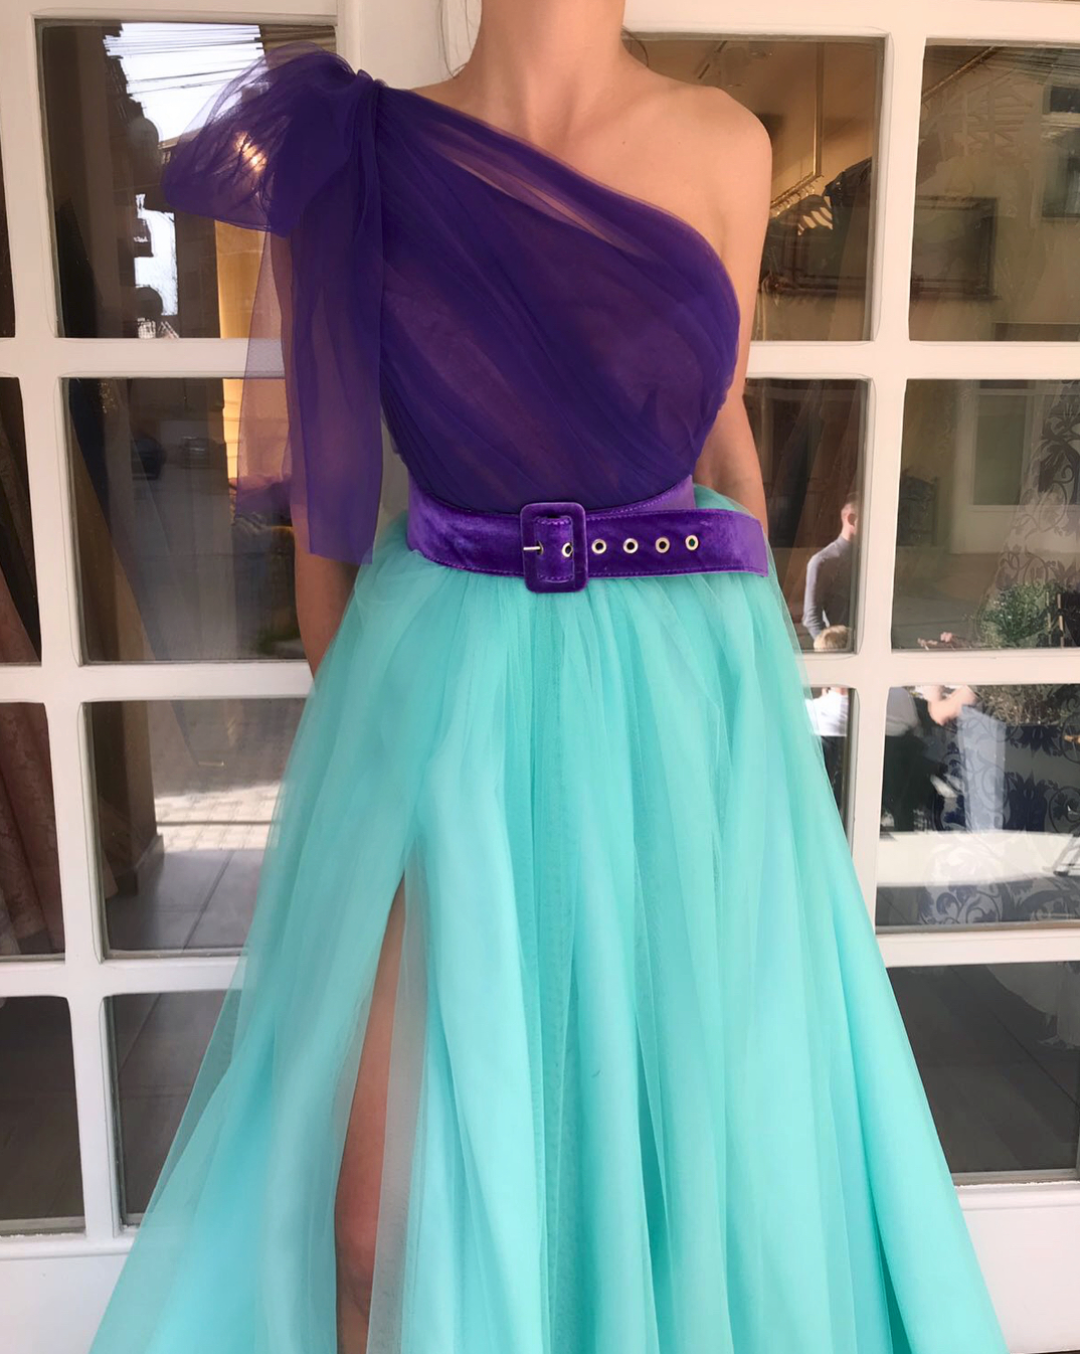 Purple and blue A-Line dress with one shoulder sleeve and belt